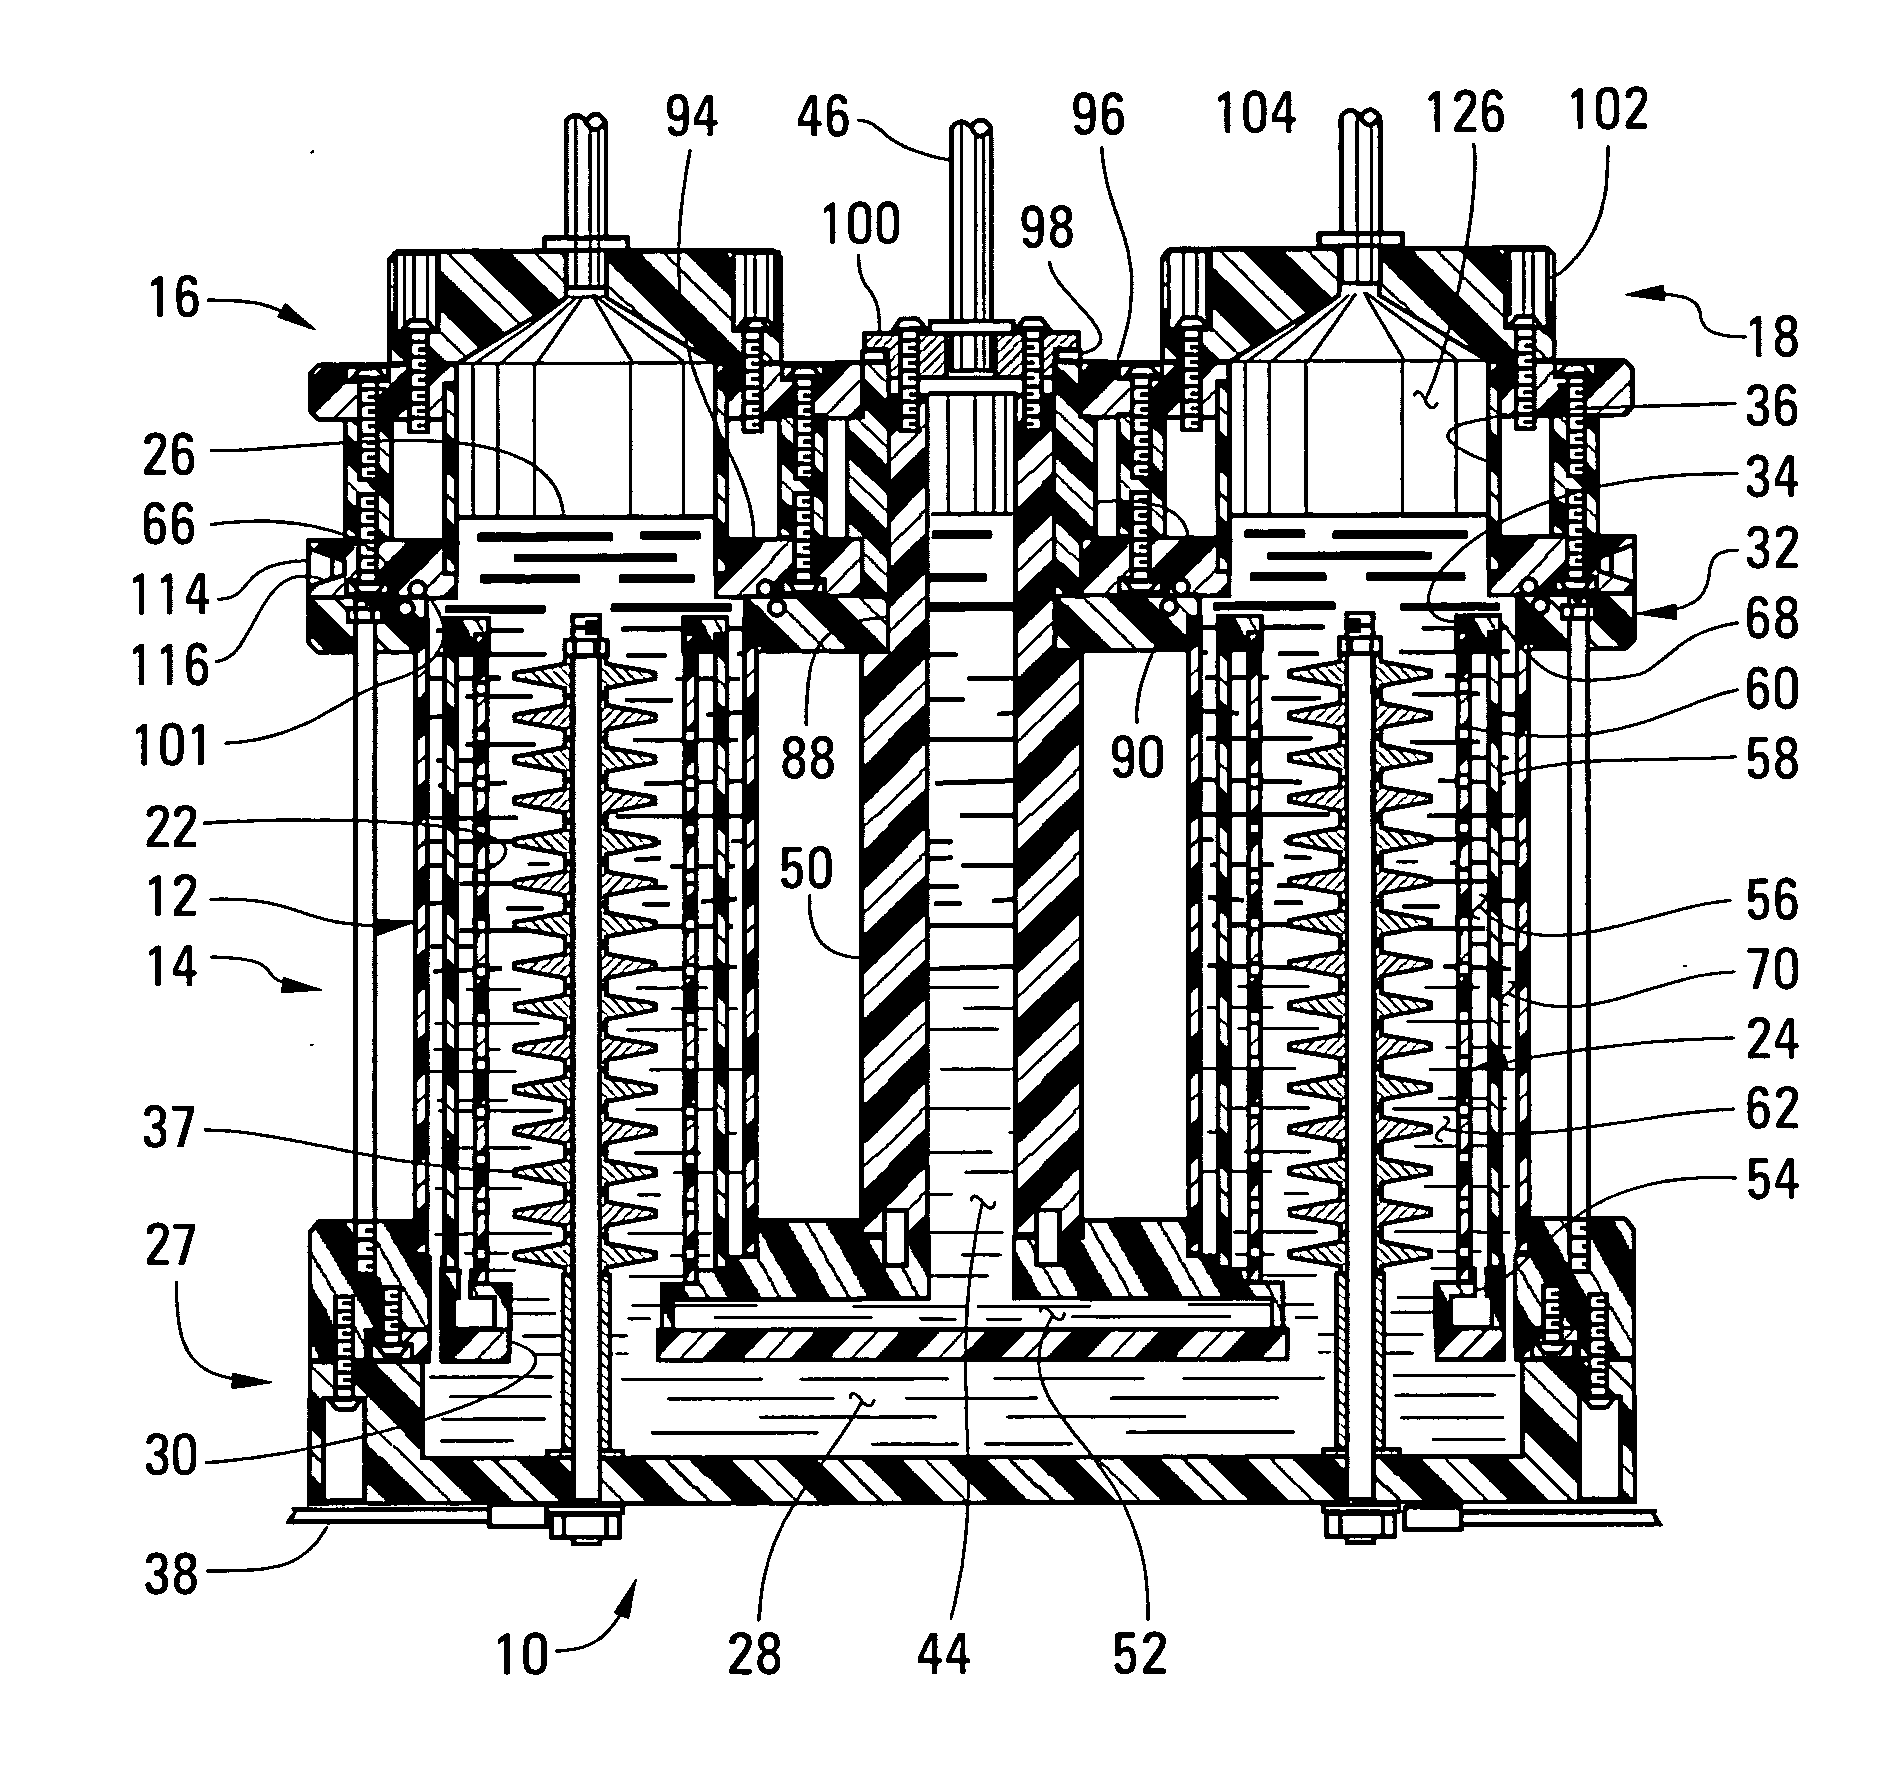 Hydrogen and oxygen generator with polarity switching in electrolytic cells